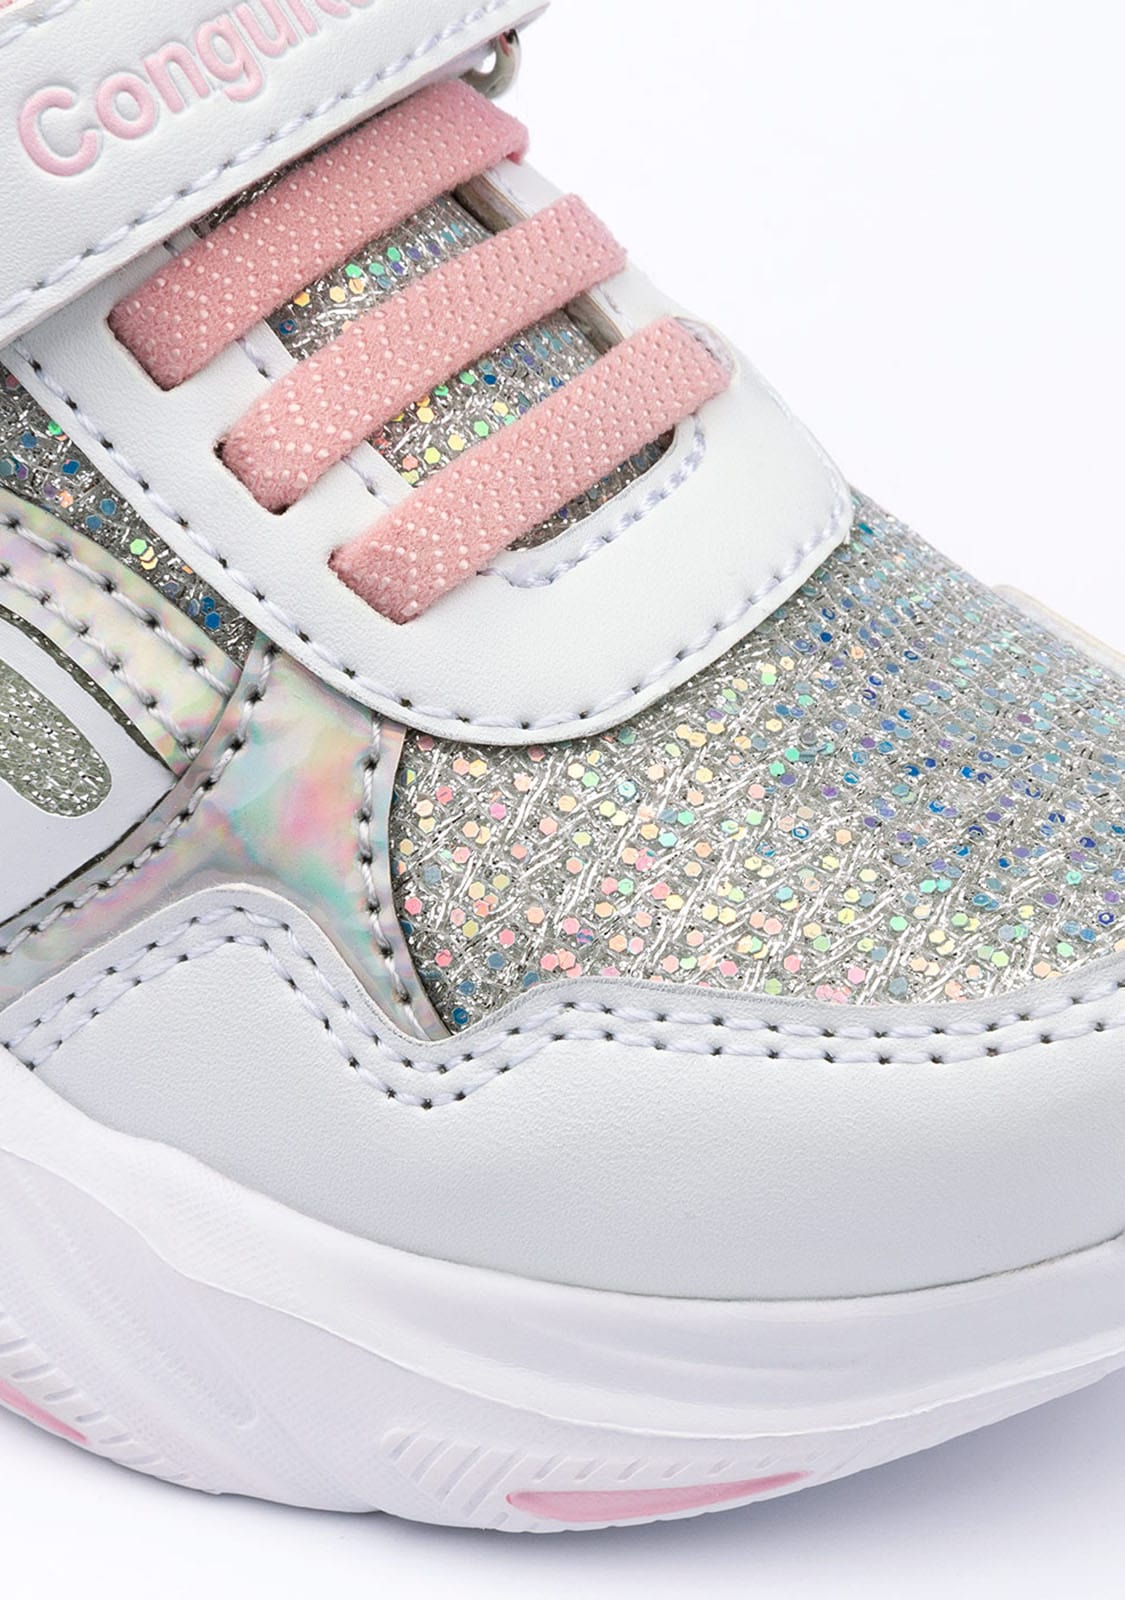 CONGUITOS Shoes Girl's White With Lights Sneakers Glitter